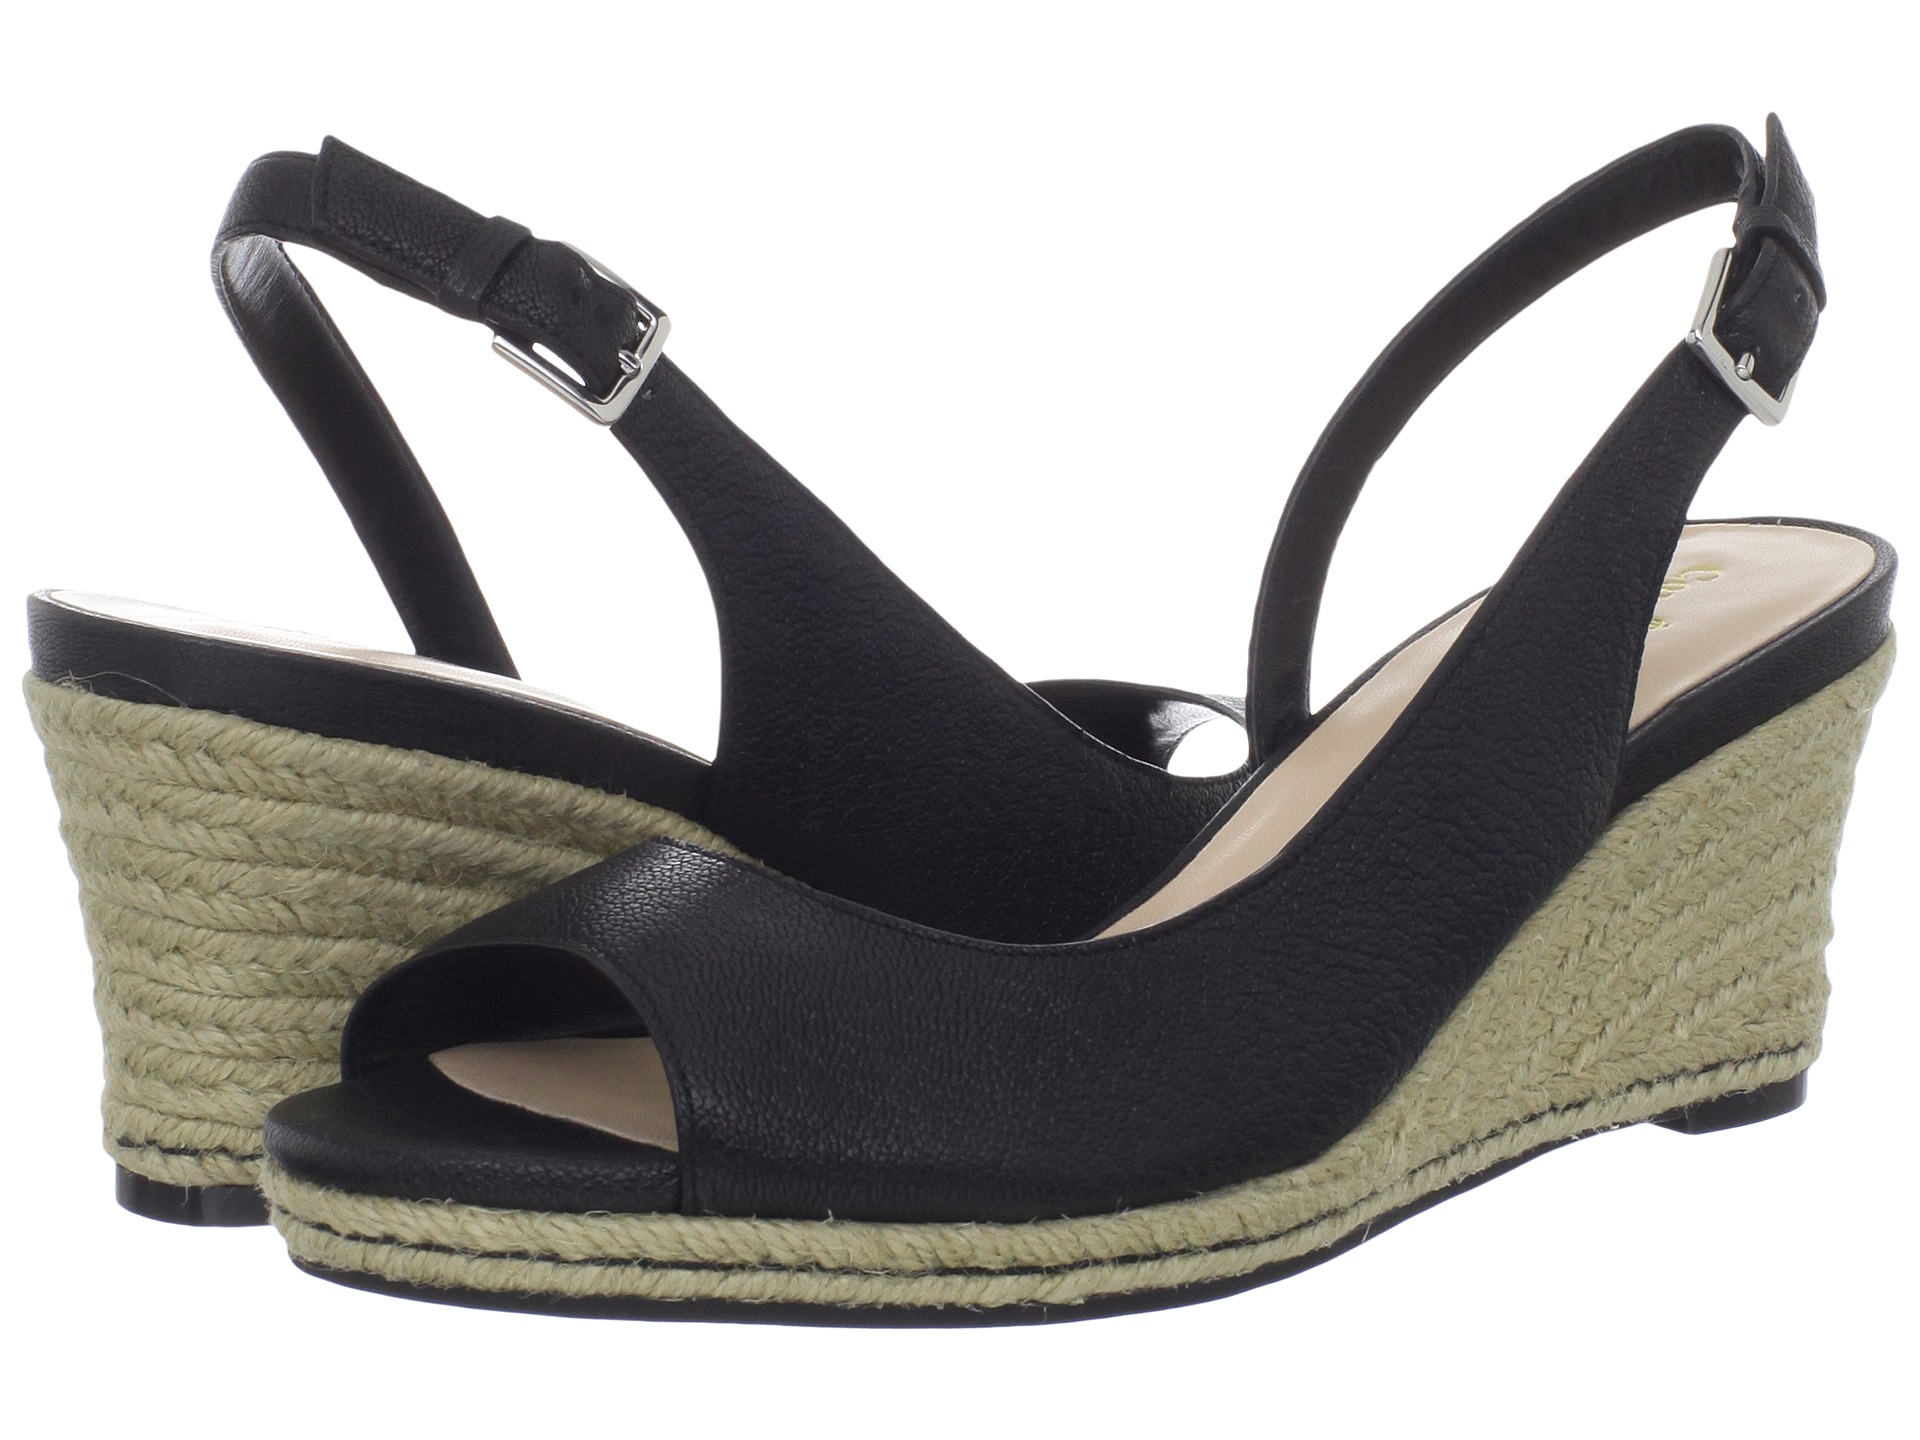 Cole Haan Adelaide Mid Wedge Black | Shipped Free at Zappos